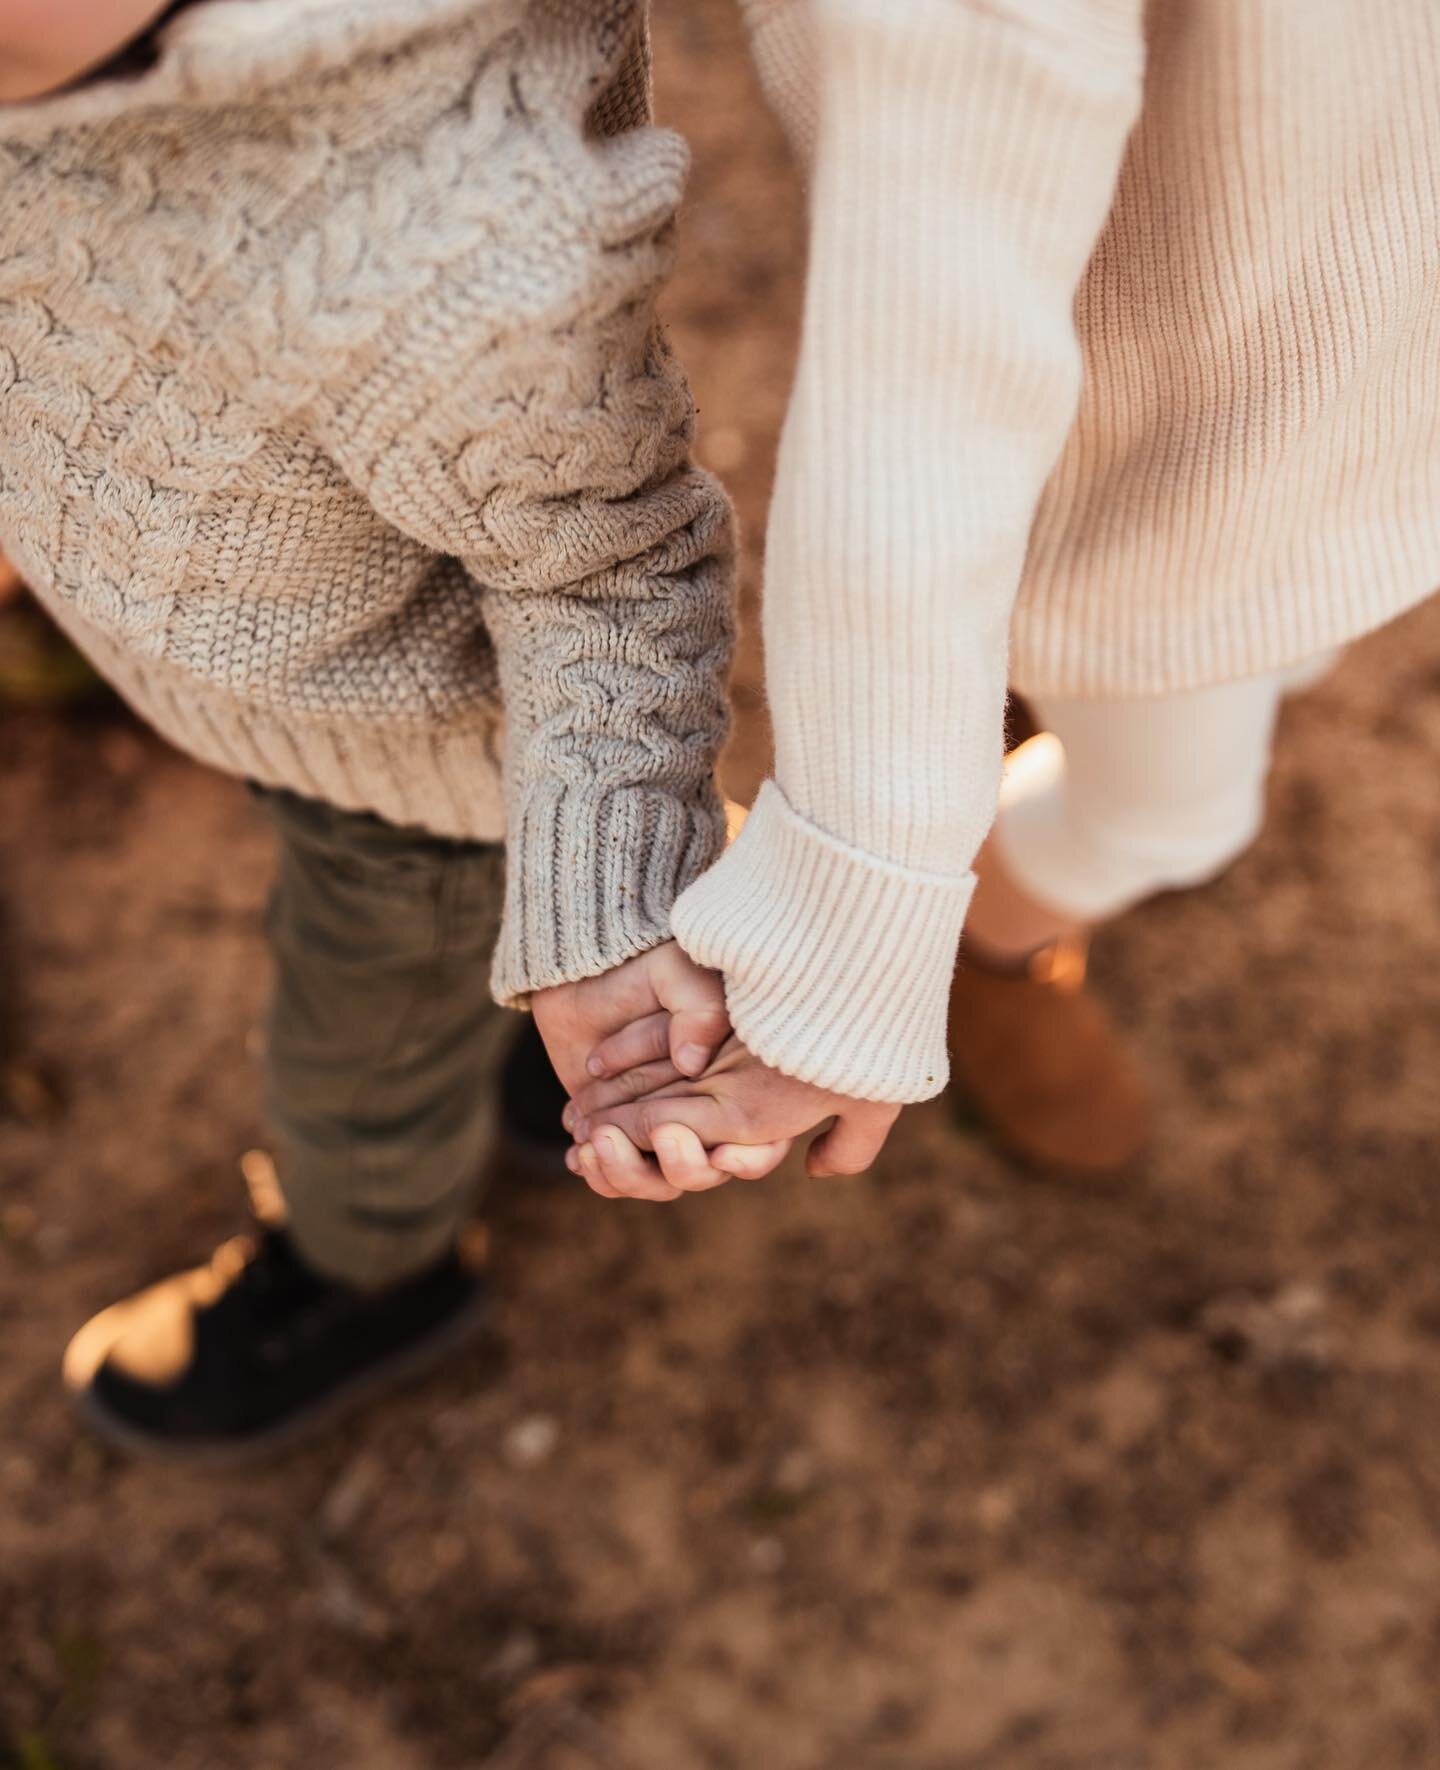 When you turn around and see siblings just holding hands&hellip; 🥰 didn&rsquo;t even have to ask them 😍
.
.
.
#socalphotographer #orangecountyphotographer #orangecountyfamilyphotographer #socalfamilyphotographer #riversidefamilyphotographer #newpor